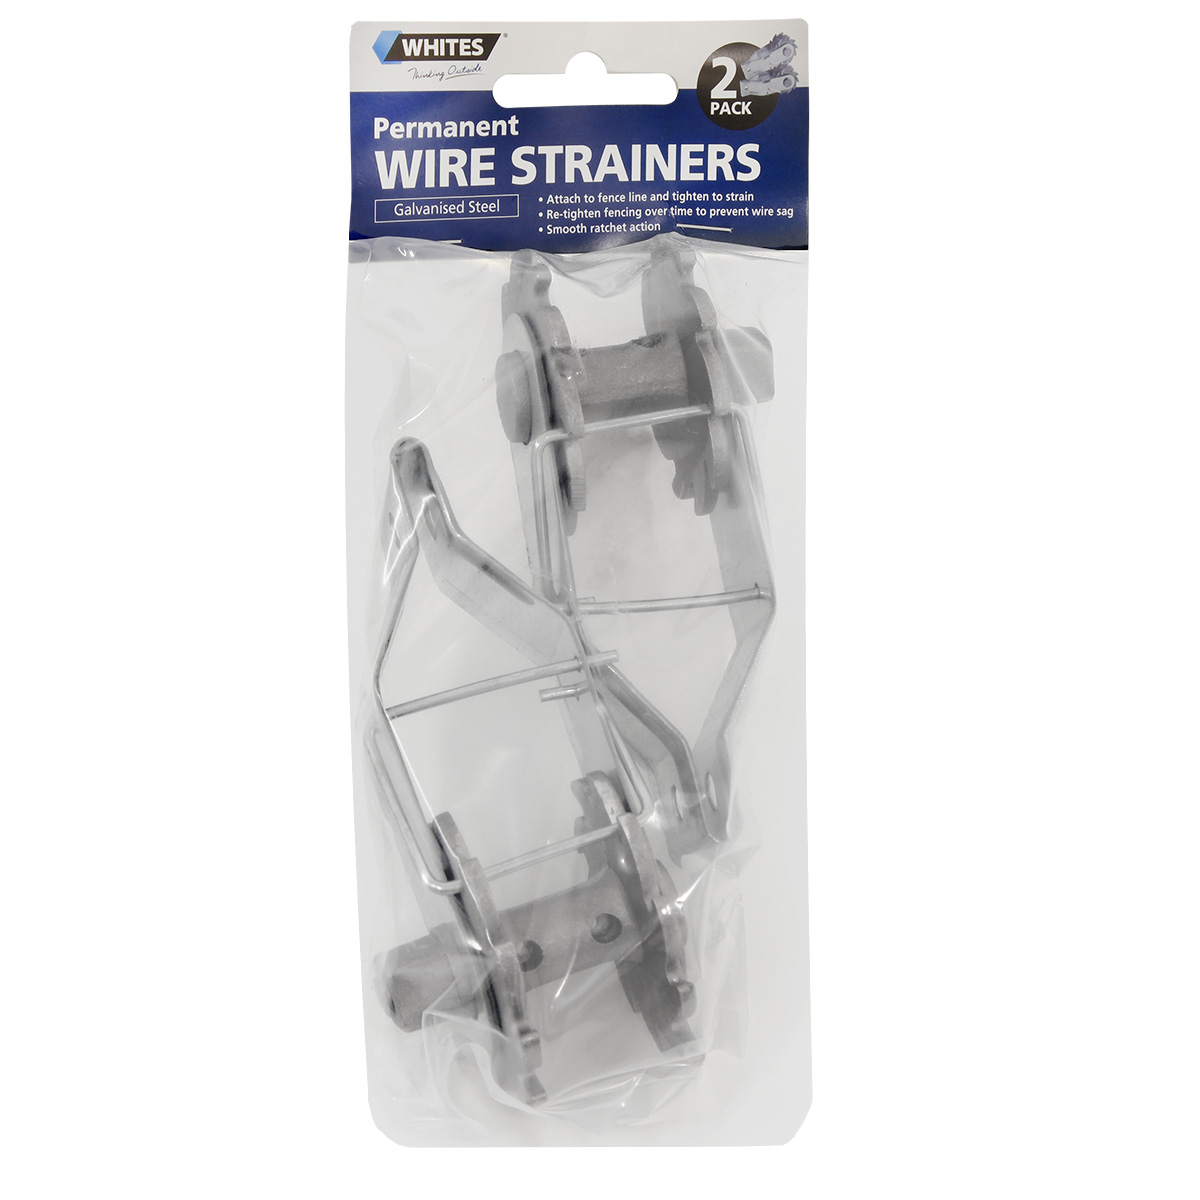 12198 - Permanent Wire Strainers 2 pack